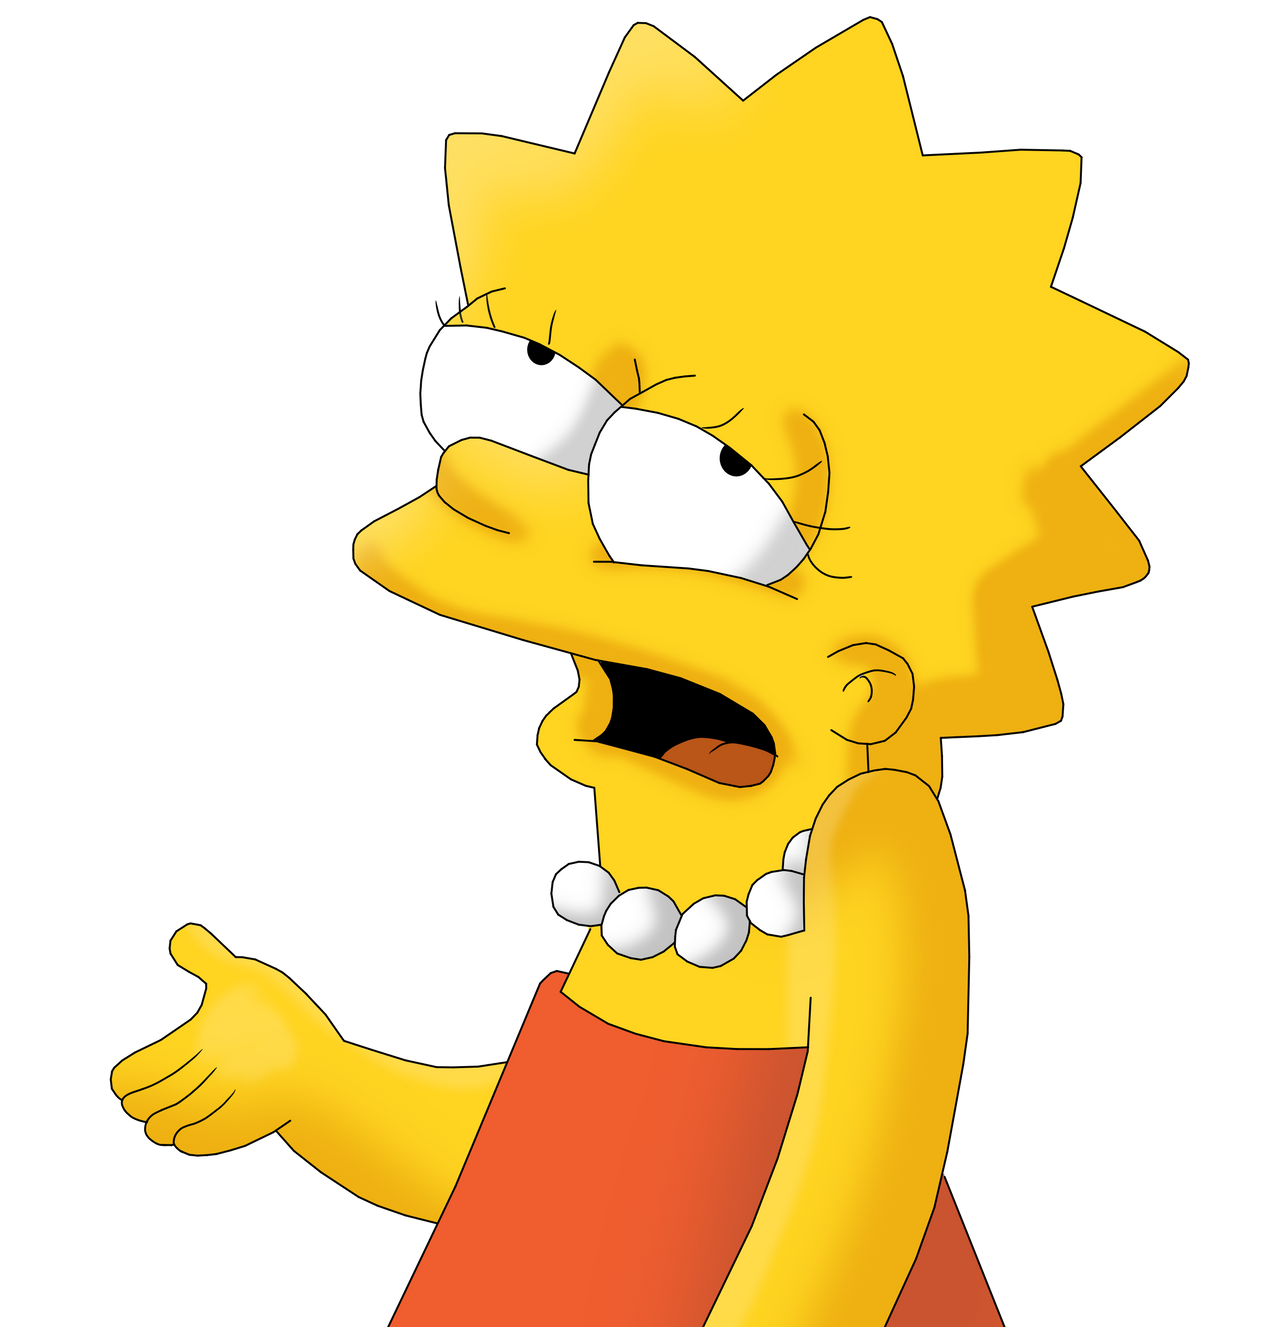 lisa_simpson_meh_by_captainedwardteague_dduzwf7-fullview.png.